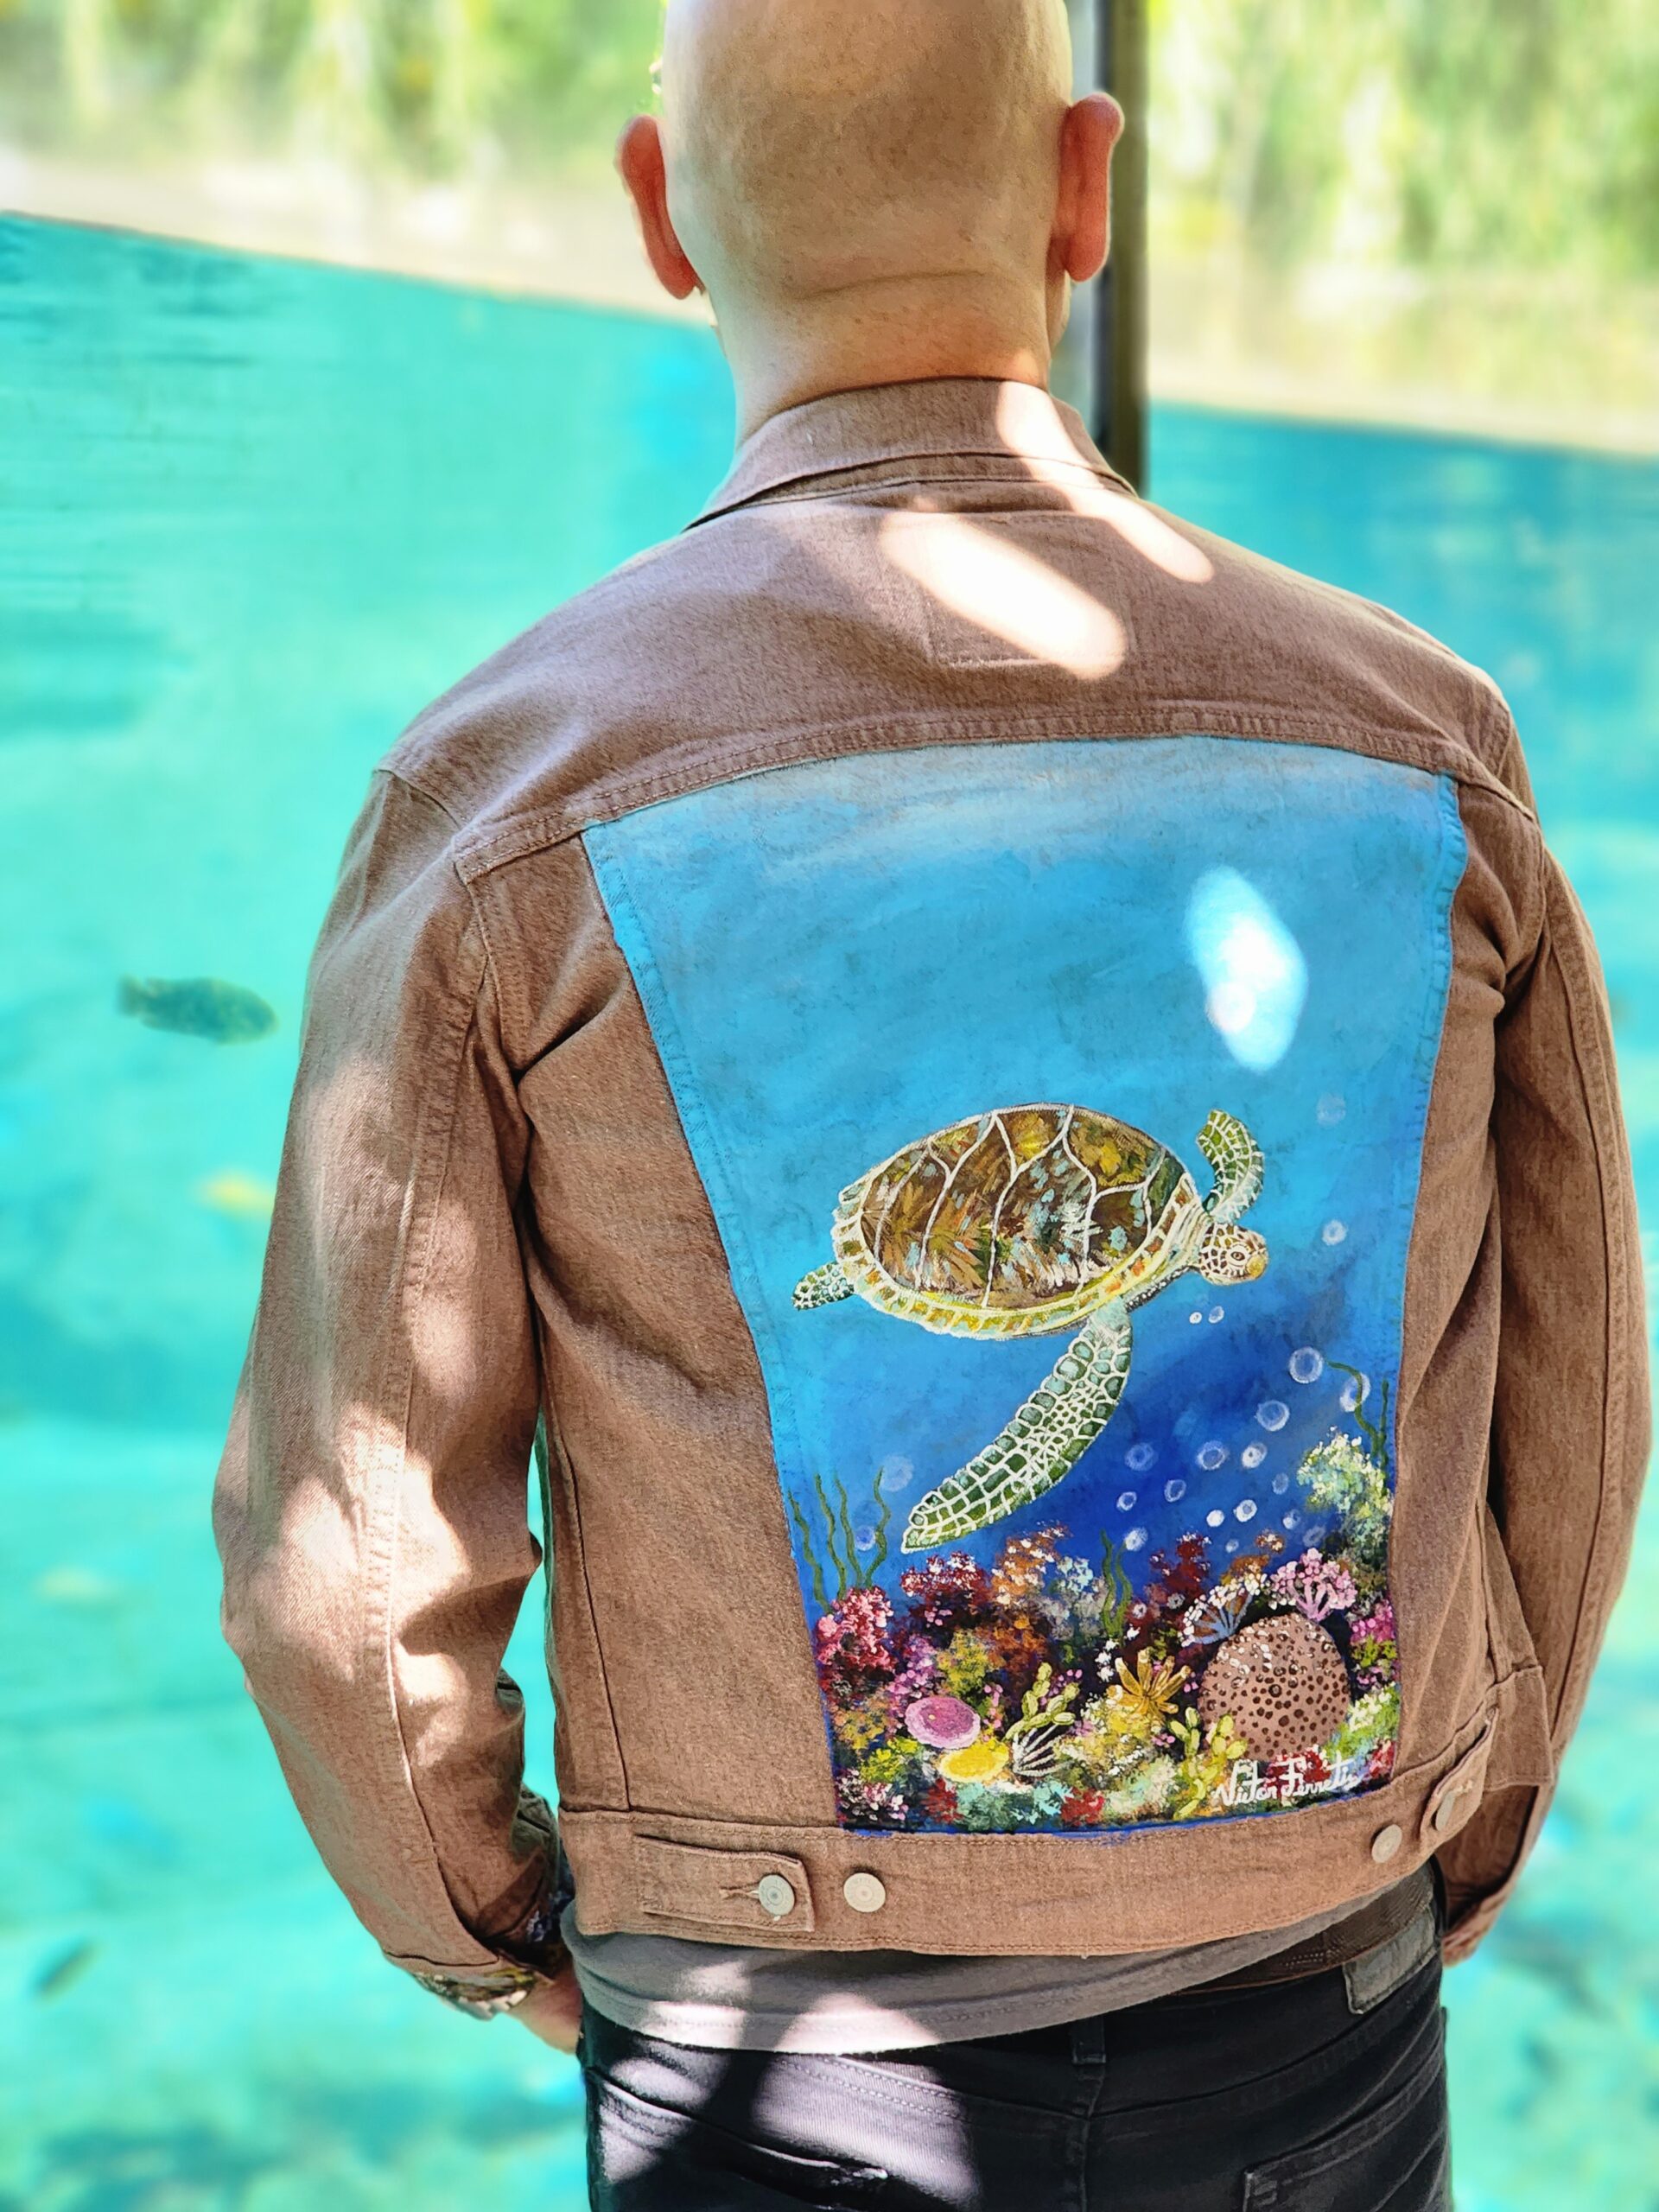 This garment is a one-of-a-kind hand-painted denim jacket with acrylic textile paint. This beautiful jacket has been heat-pressed so the jacket is machine washable.